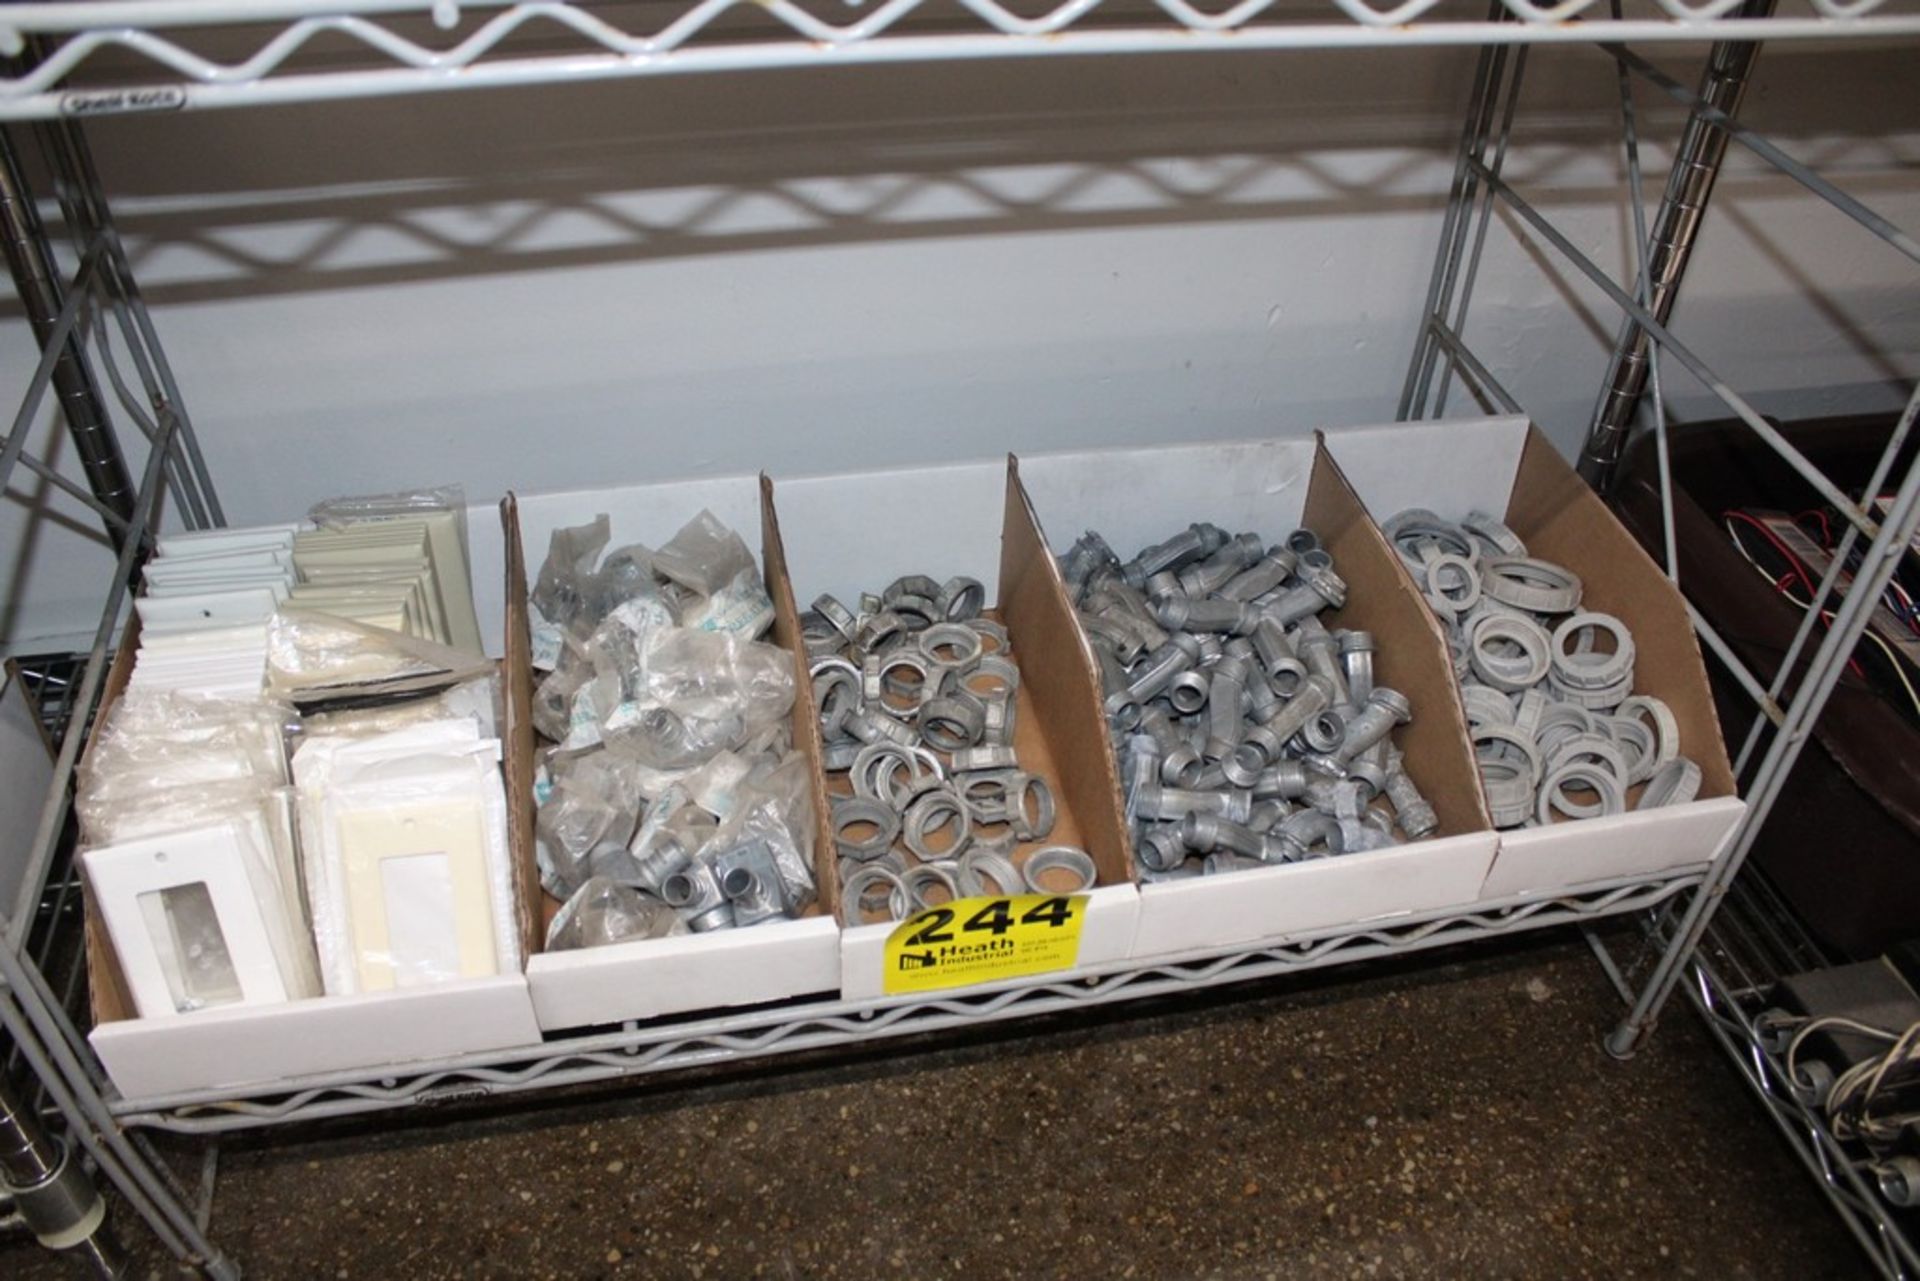 ASSORTED SWITCH COVERS AND CONDUIT FITTINGS ON SHELF